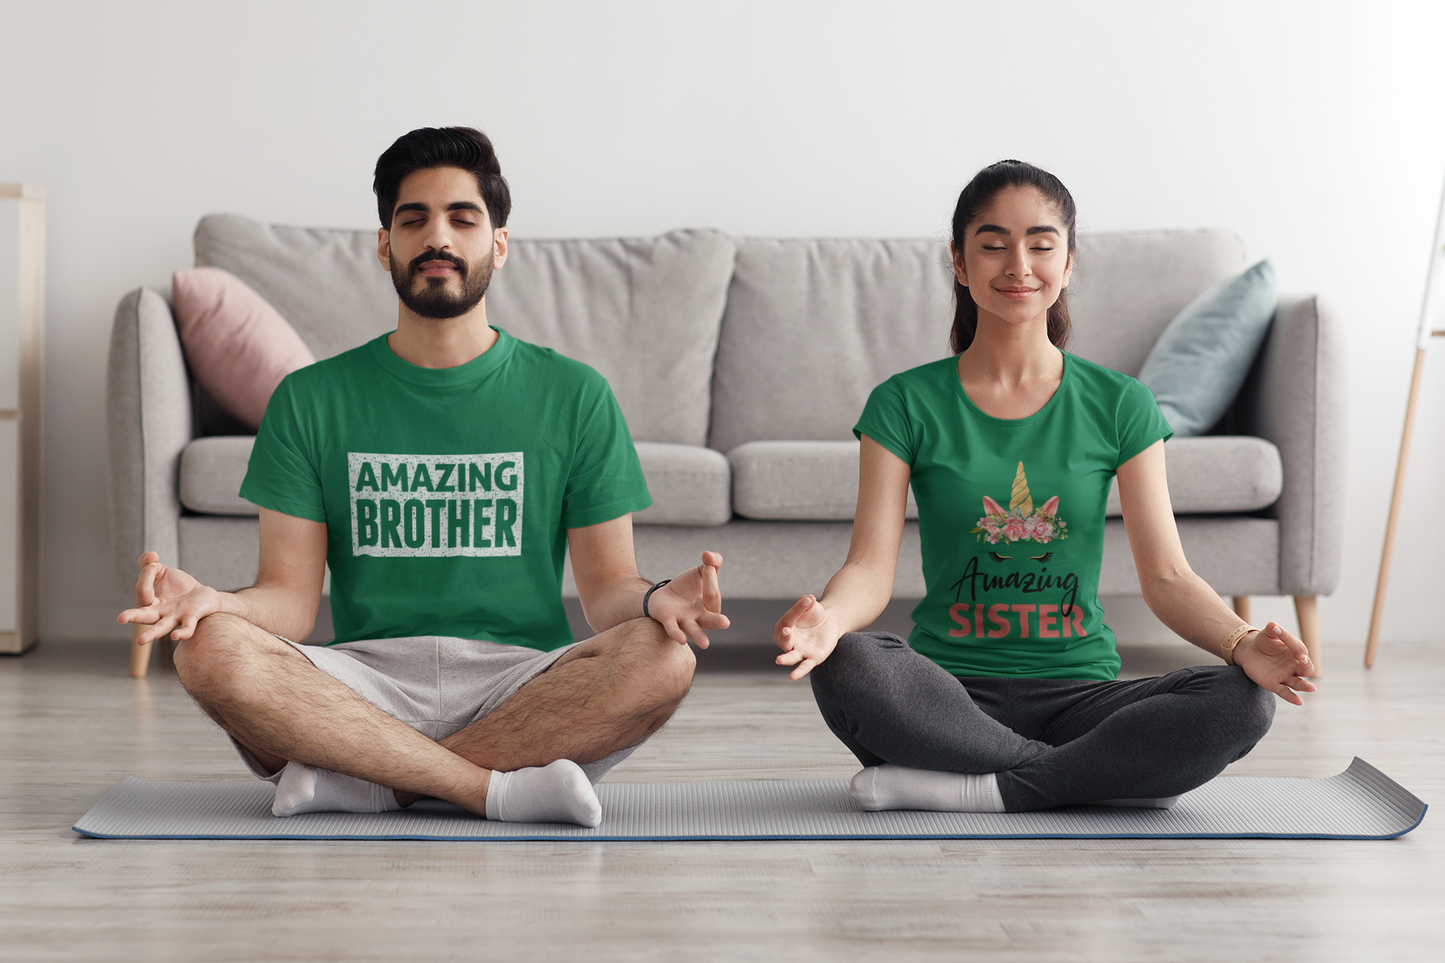 Amazing Brother - Sister, Family Shirts, Family Reunion Shirts, Trendy Shirts